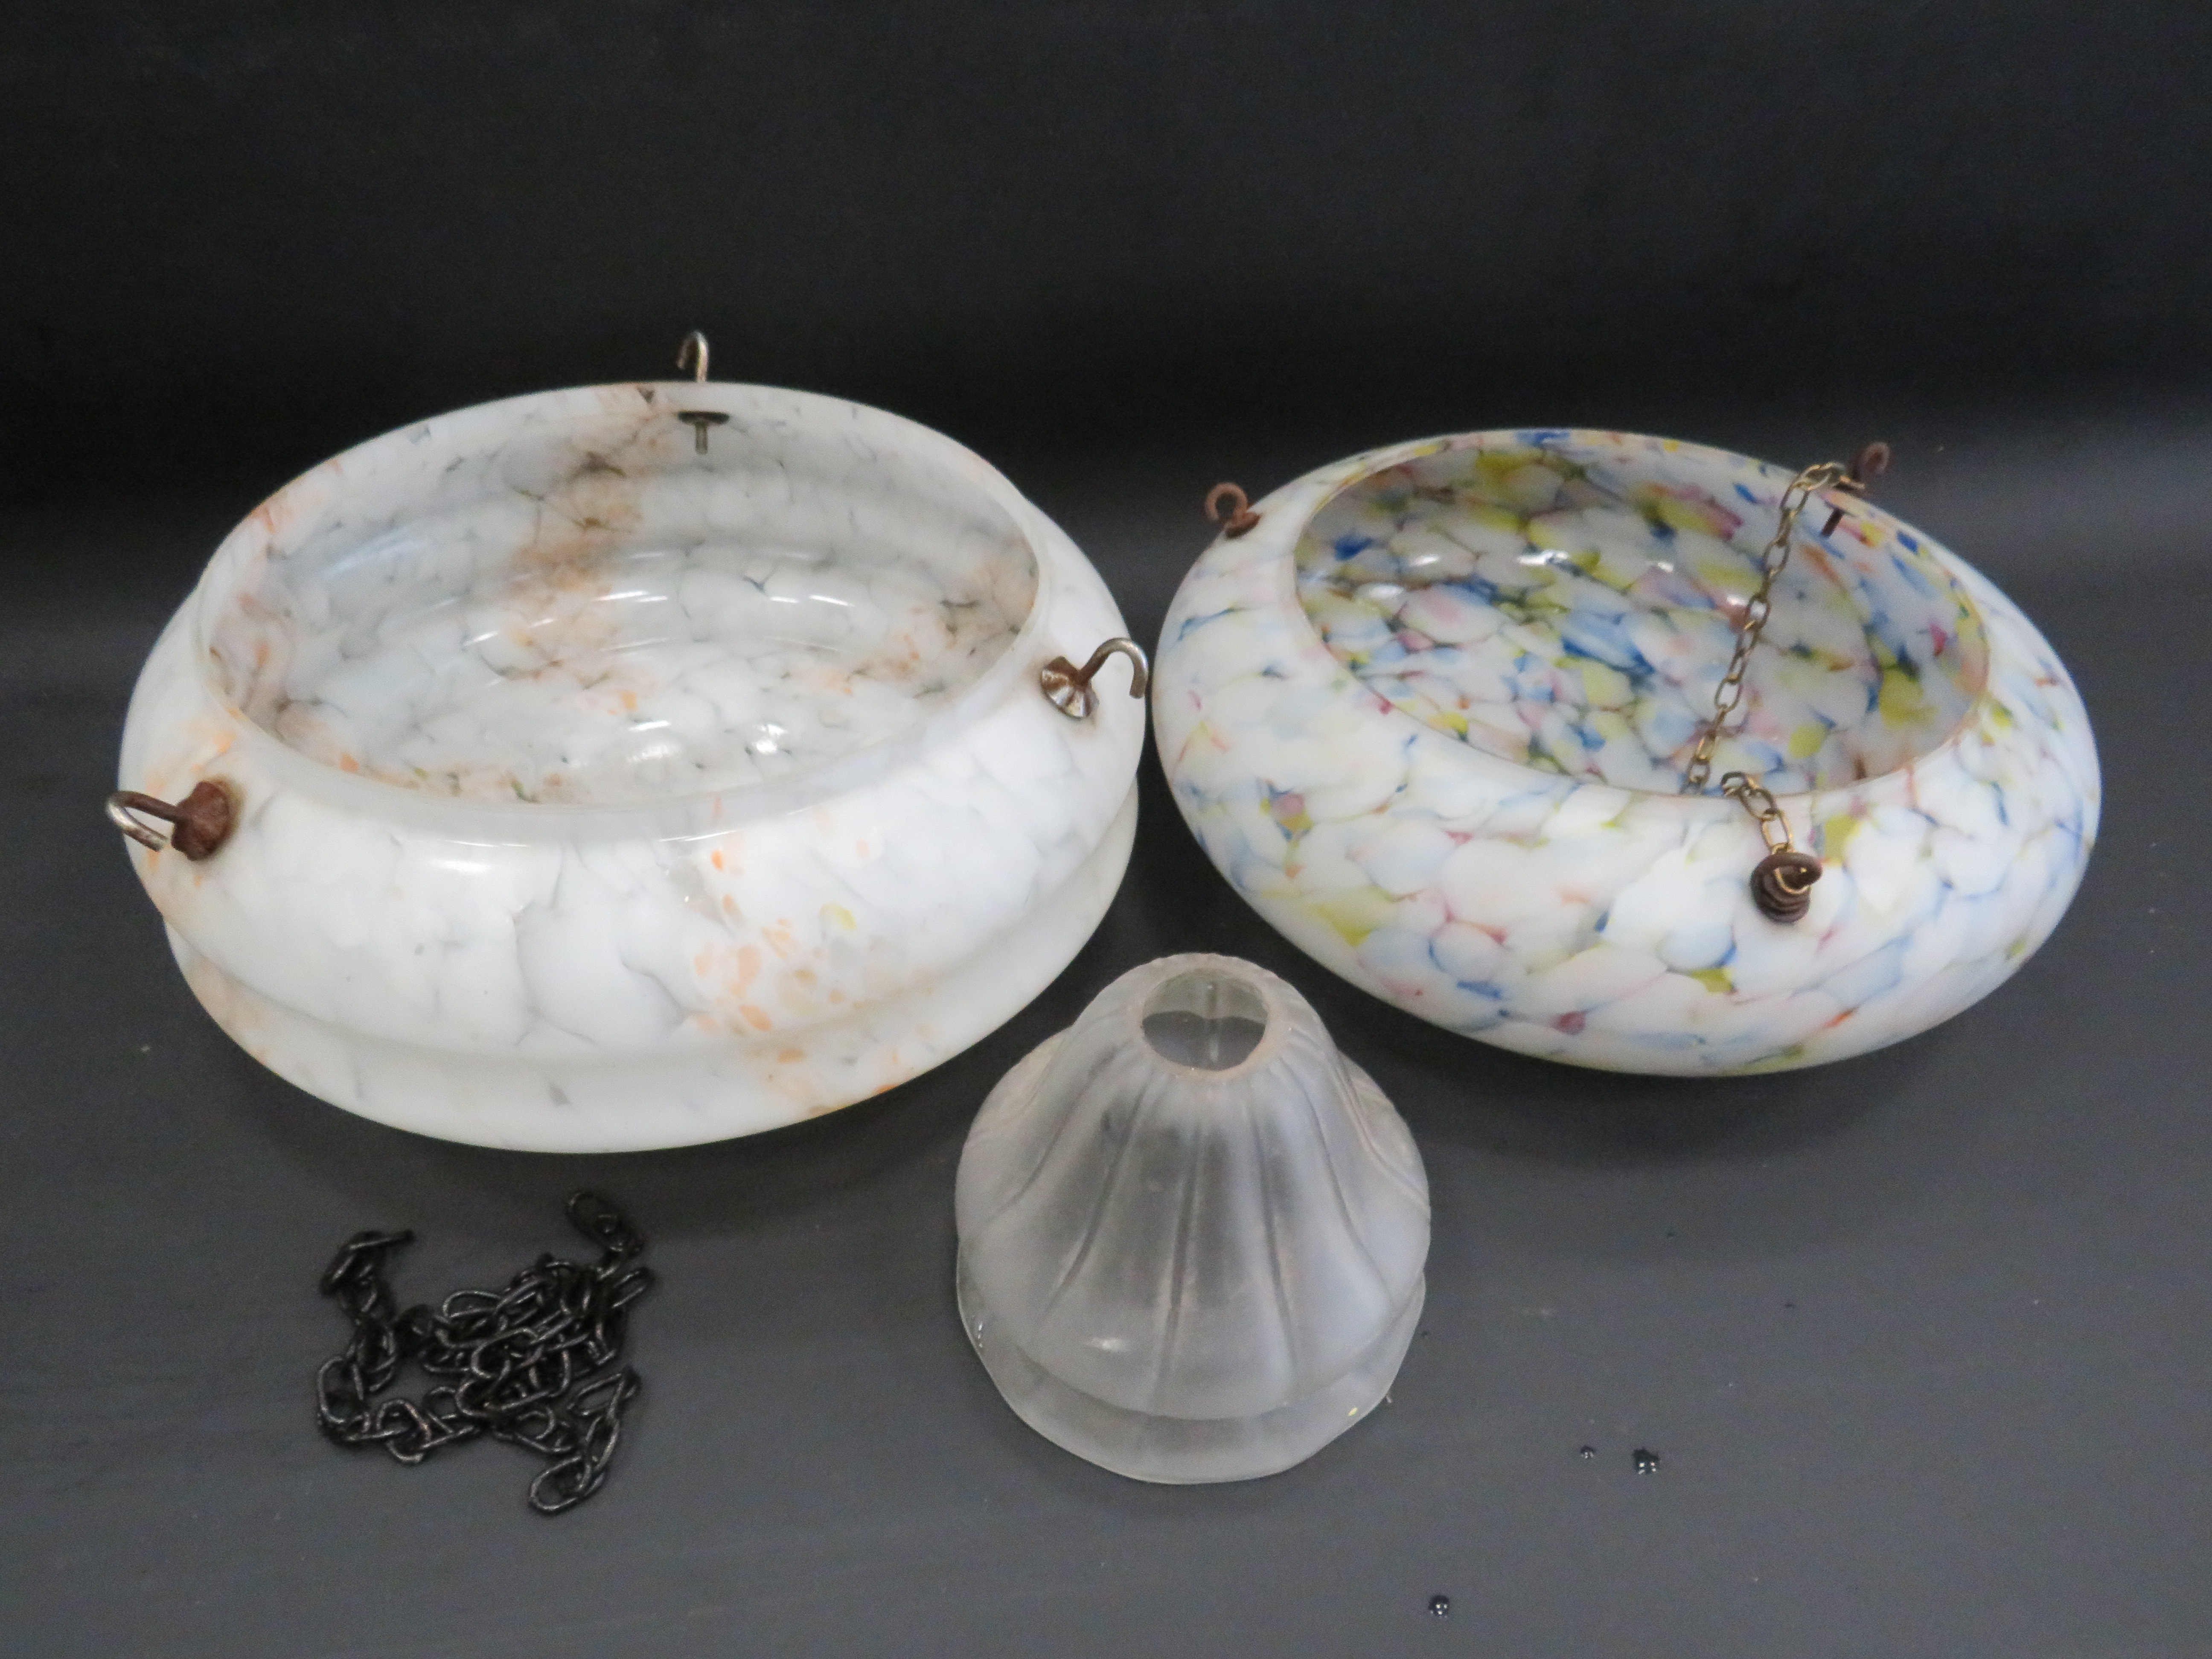 2 Art deco glass flycatcher light shades both approx 12" diameter plus 1 small frosted glass shade.